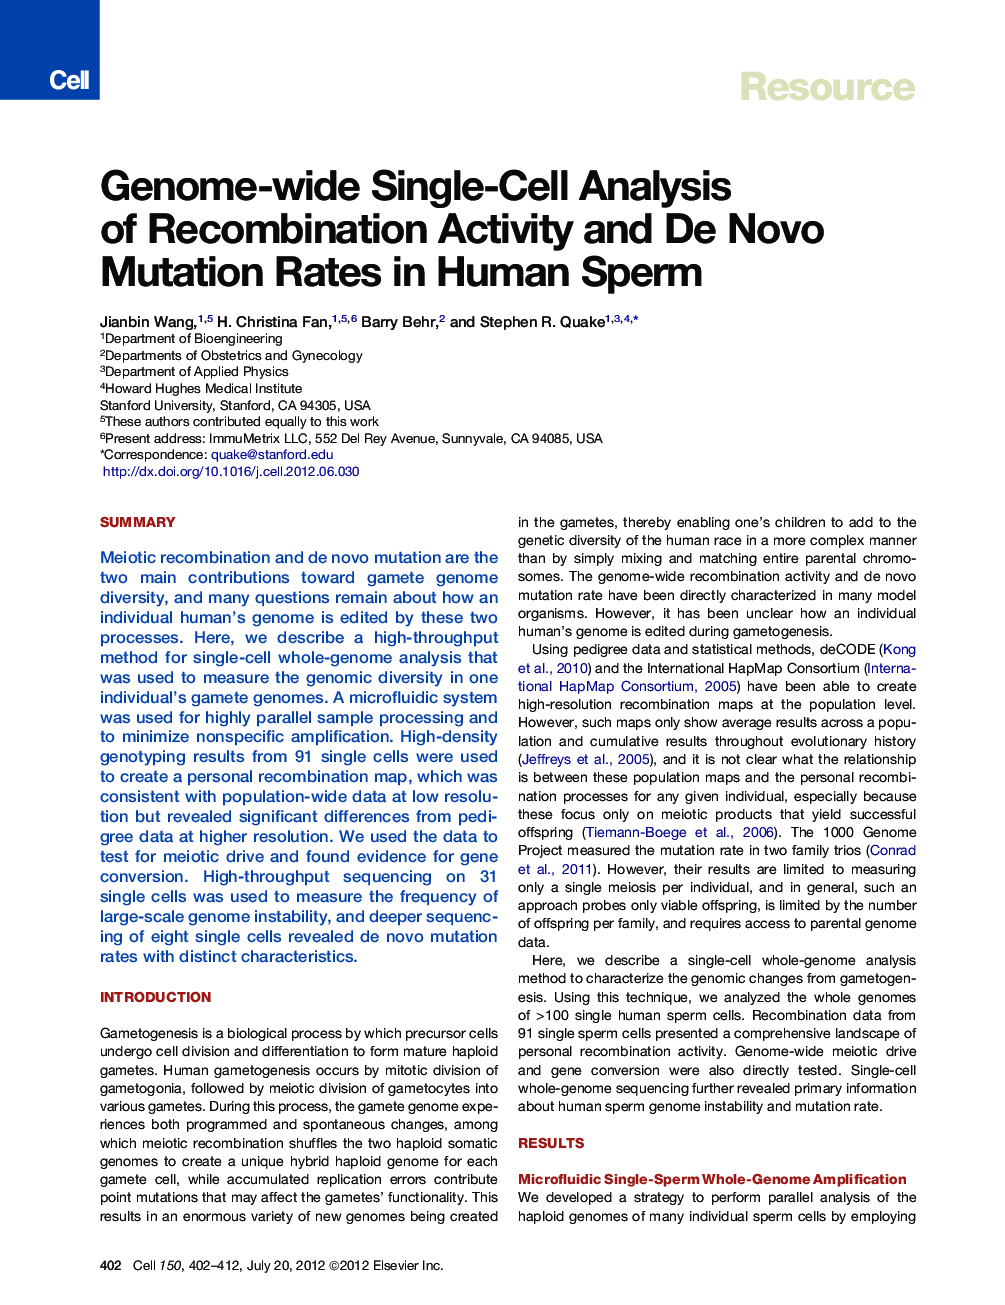 Genome-wide Single-Cell Analysis of Recombination Activity and De Novo Mutation Rates in Human Sperm